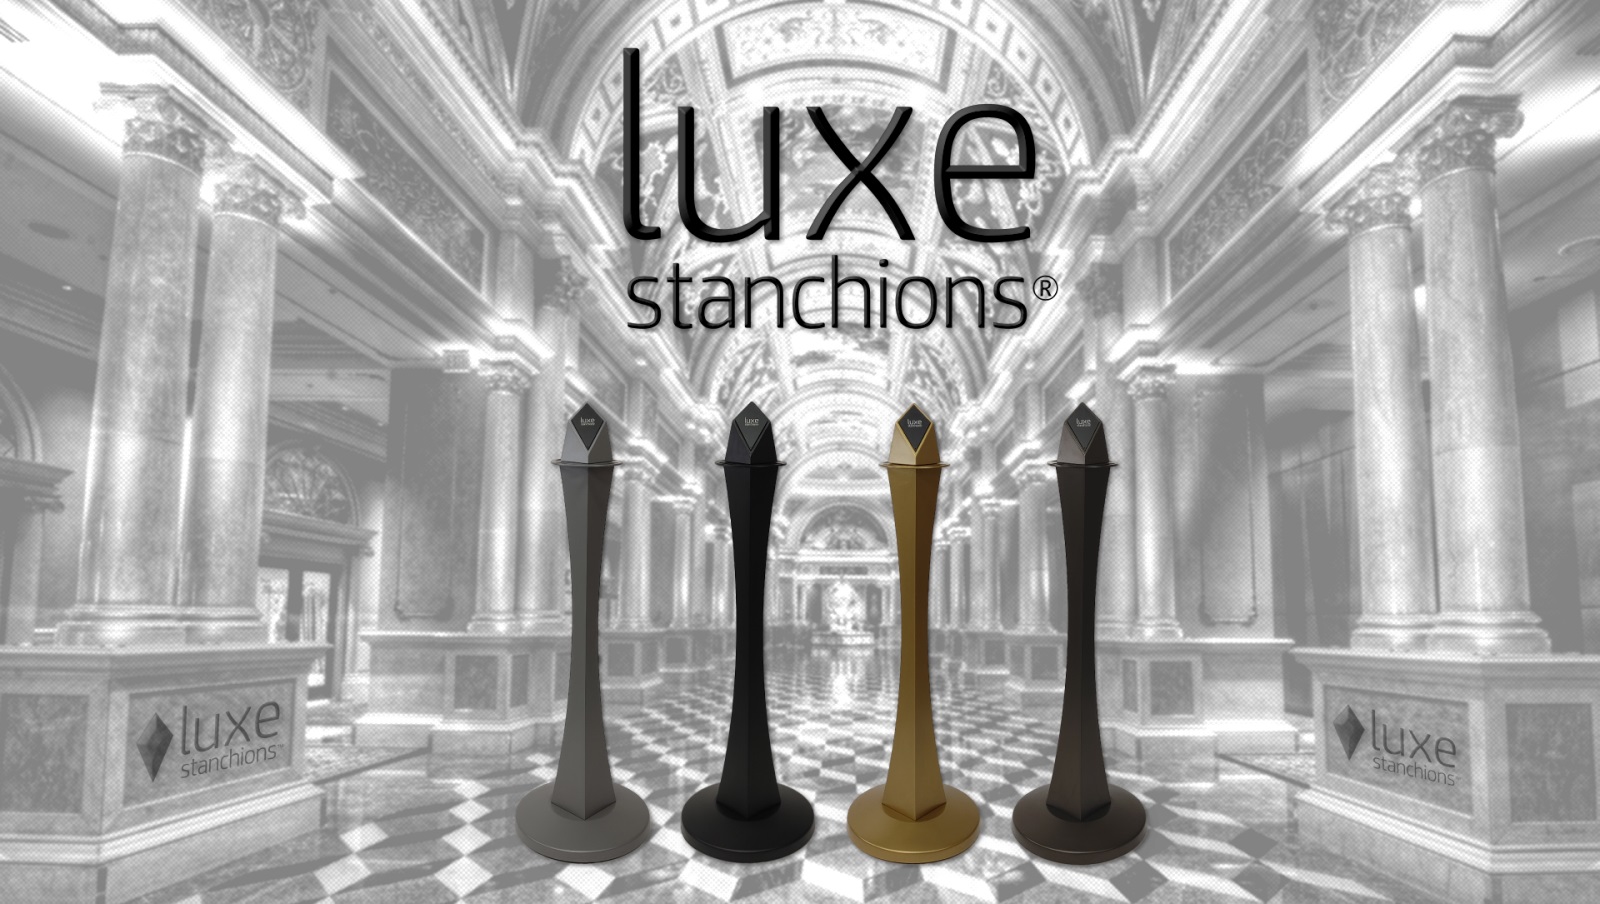 Luxe Stanchions Upscale Luxury Rope Post Barriers